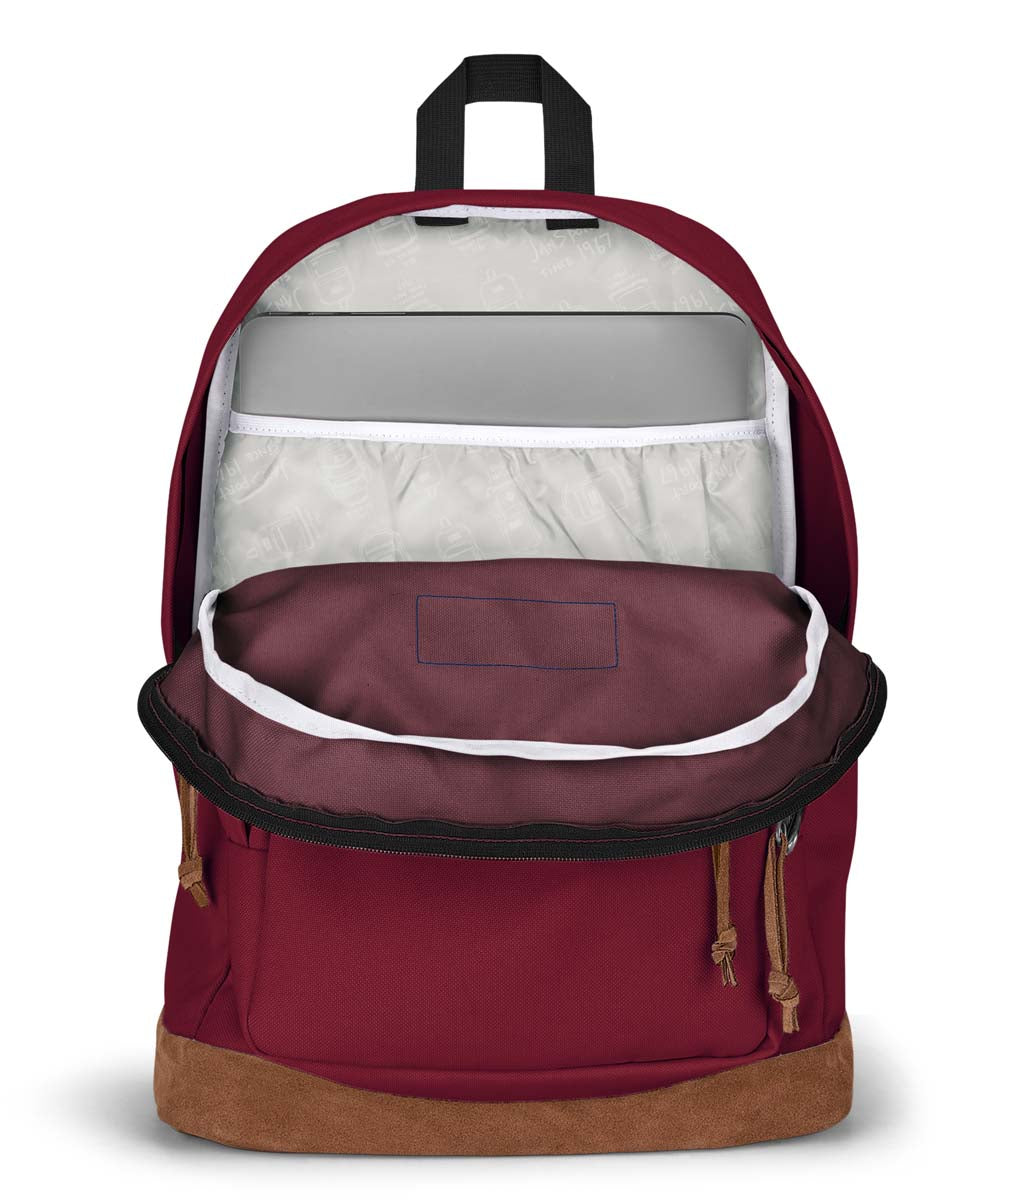 JANSPORT RIGHT PACK RUSSET RED